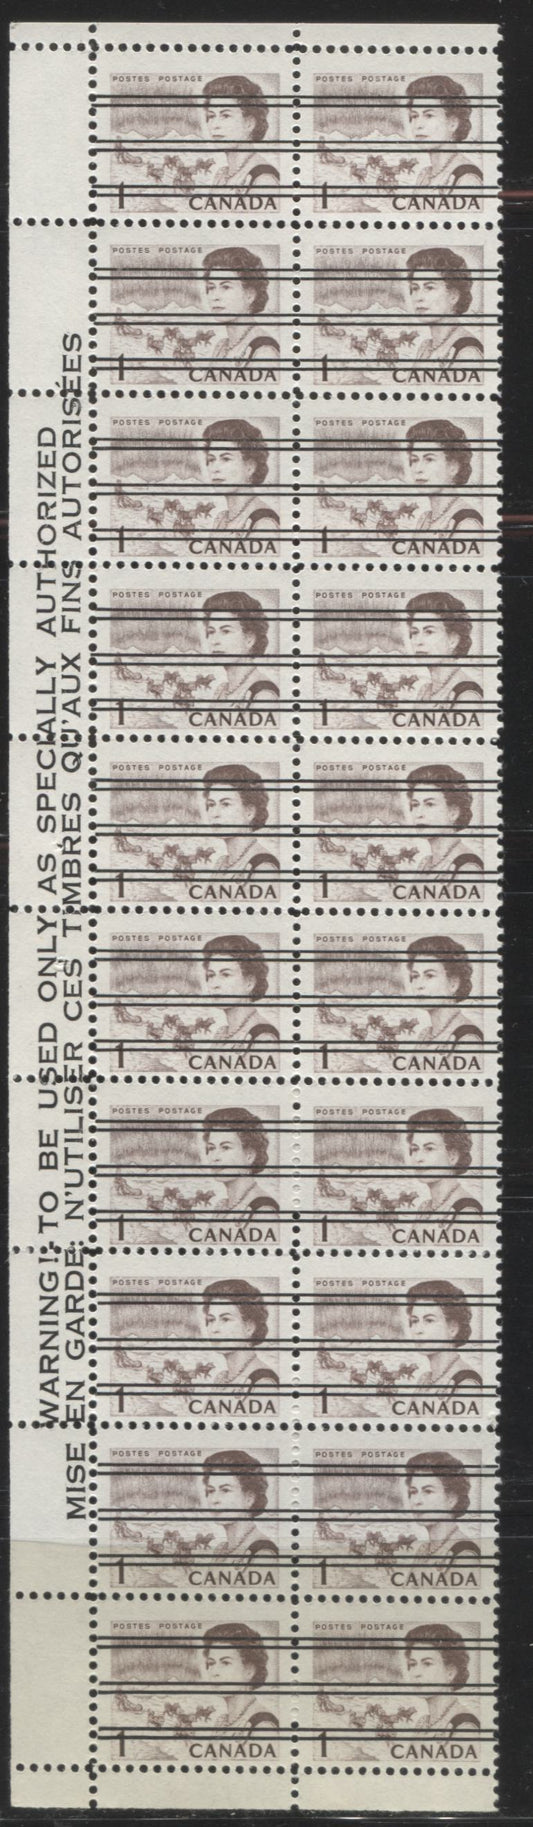 Lot #12 Canada #454xx 1c Violet Brown, Northern Lights and Dogsled Team, 1967-1973 Centennial Issue, A VFNH Precancelled Warning Strip of 20 From the Left Side of the Pane, DF Greyish White Paper, Smooth Dextrine Gum and Perf. 11.9